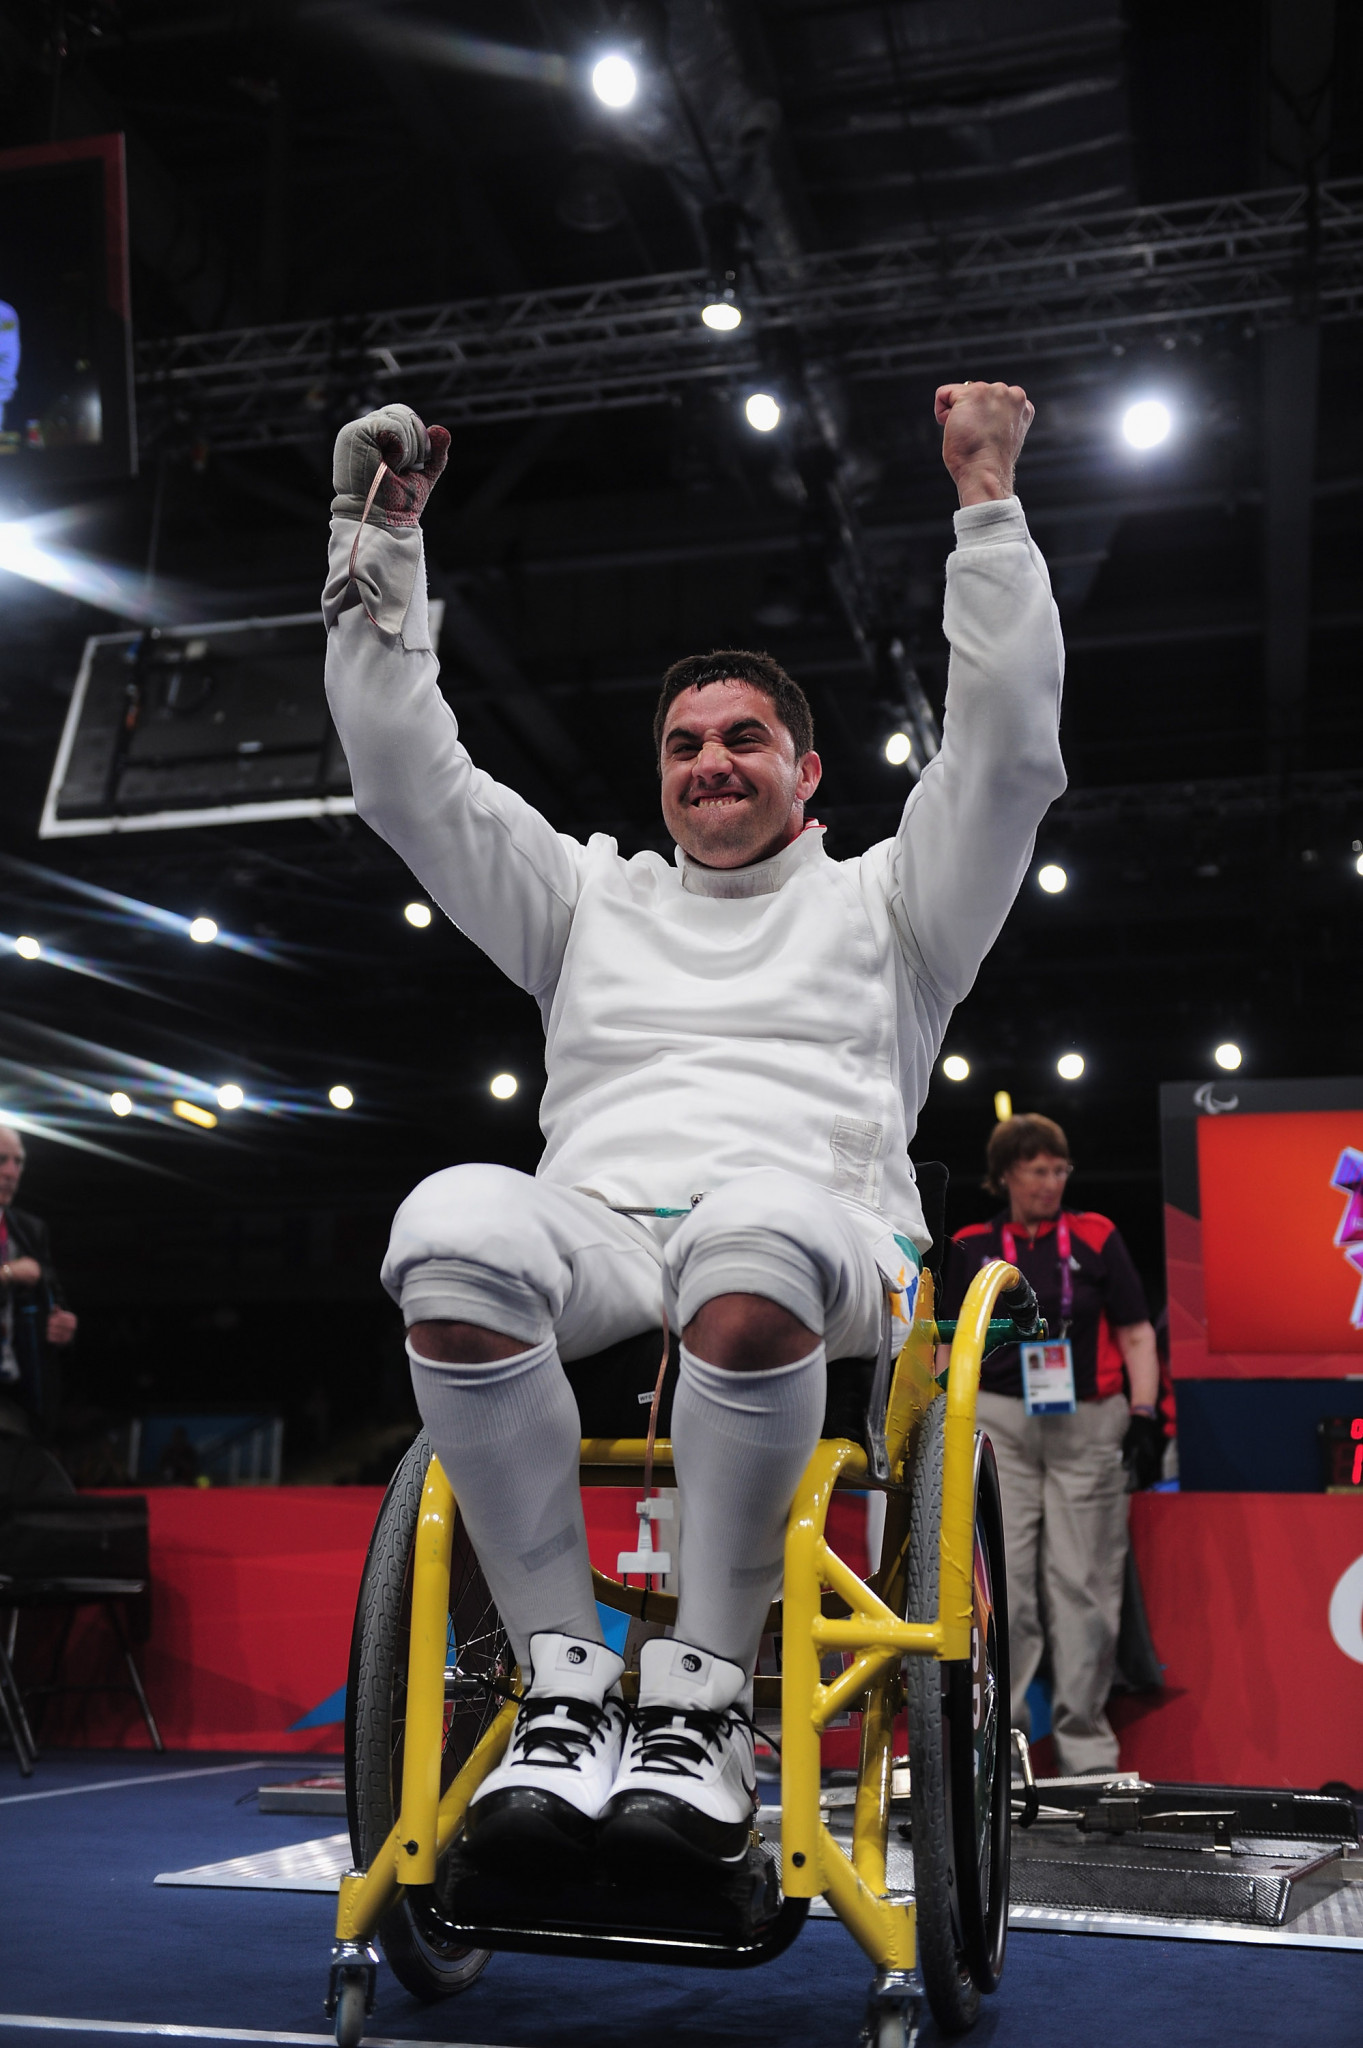 Brazil’s Guissone geared-up for home IWAS Wheelchair Fencing World Cup in São Paulo